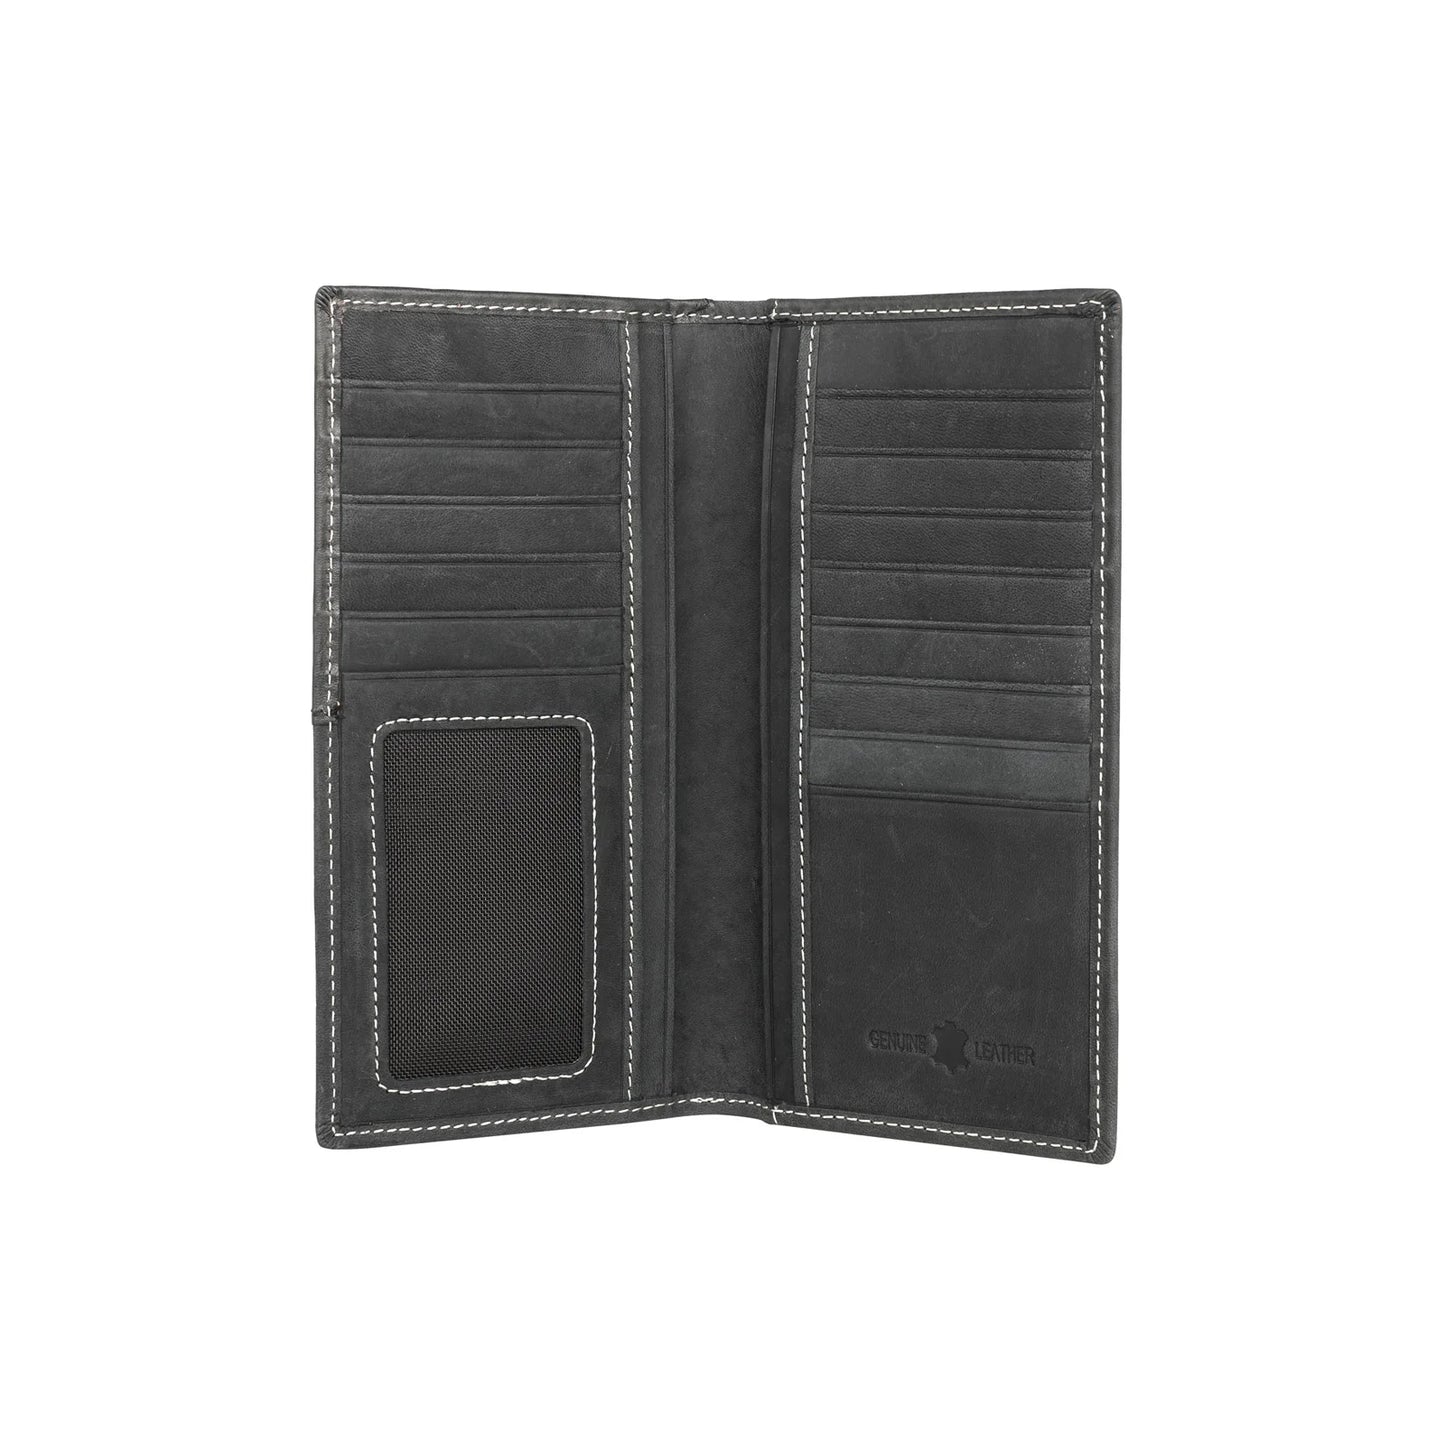 Montana West Genuine Leather Spiritual Collection Mens Wallet - Coffee - MWLW020CF